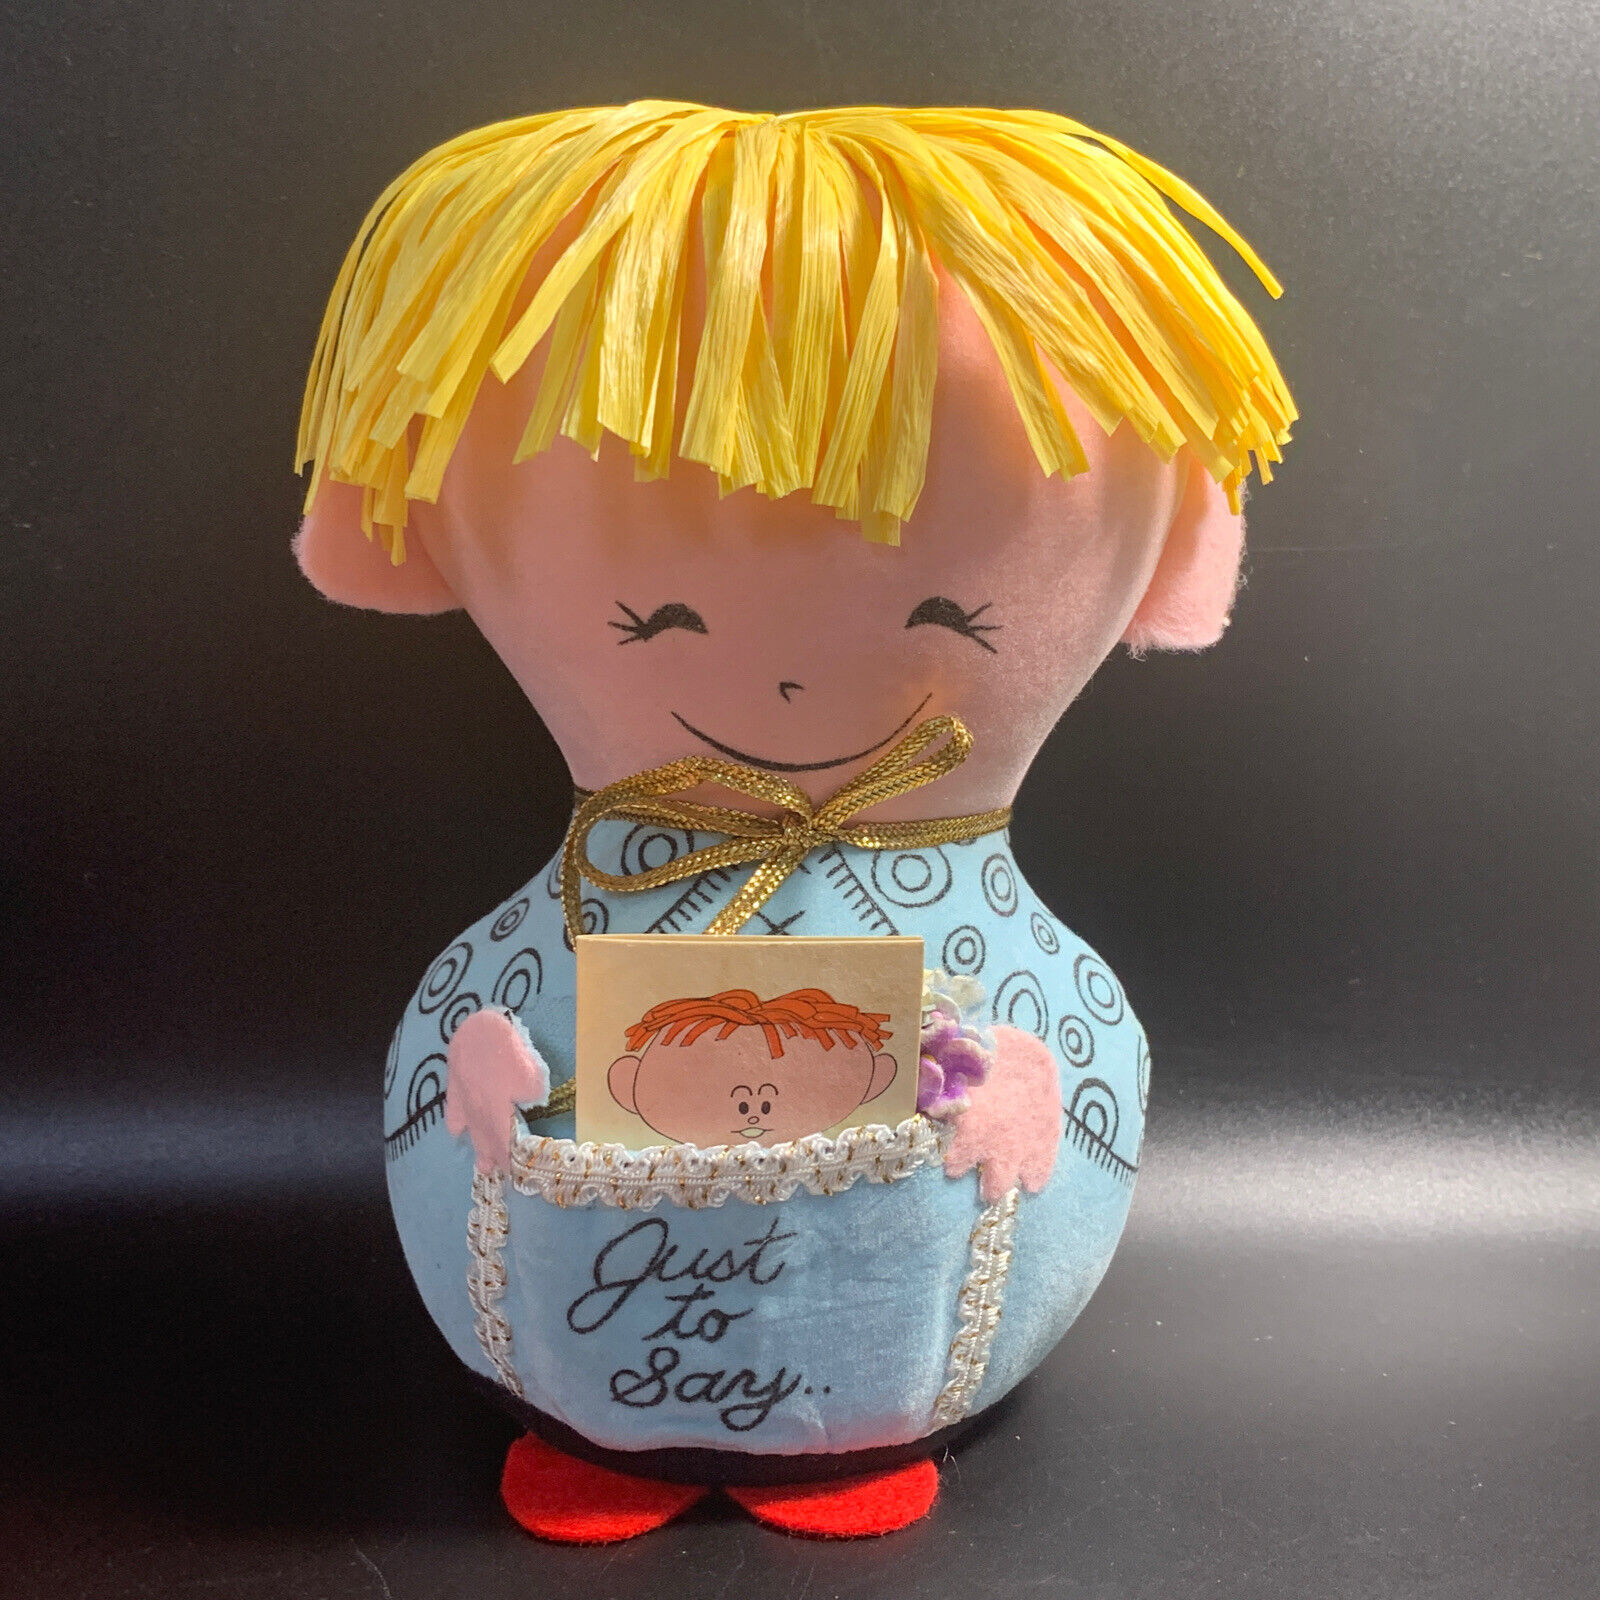 Vintage Western Union Dolly Gram Blond Boy Doll Just to Say, Happy Anniversary